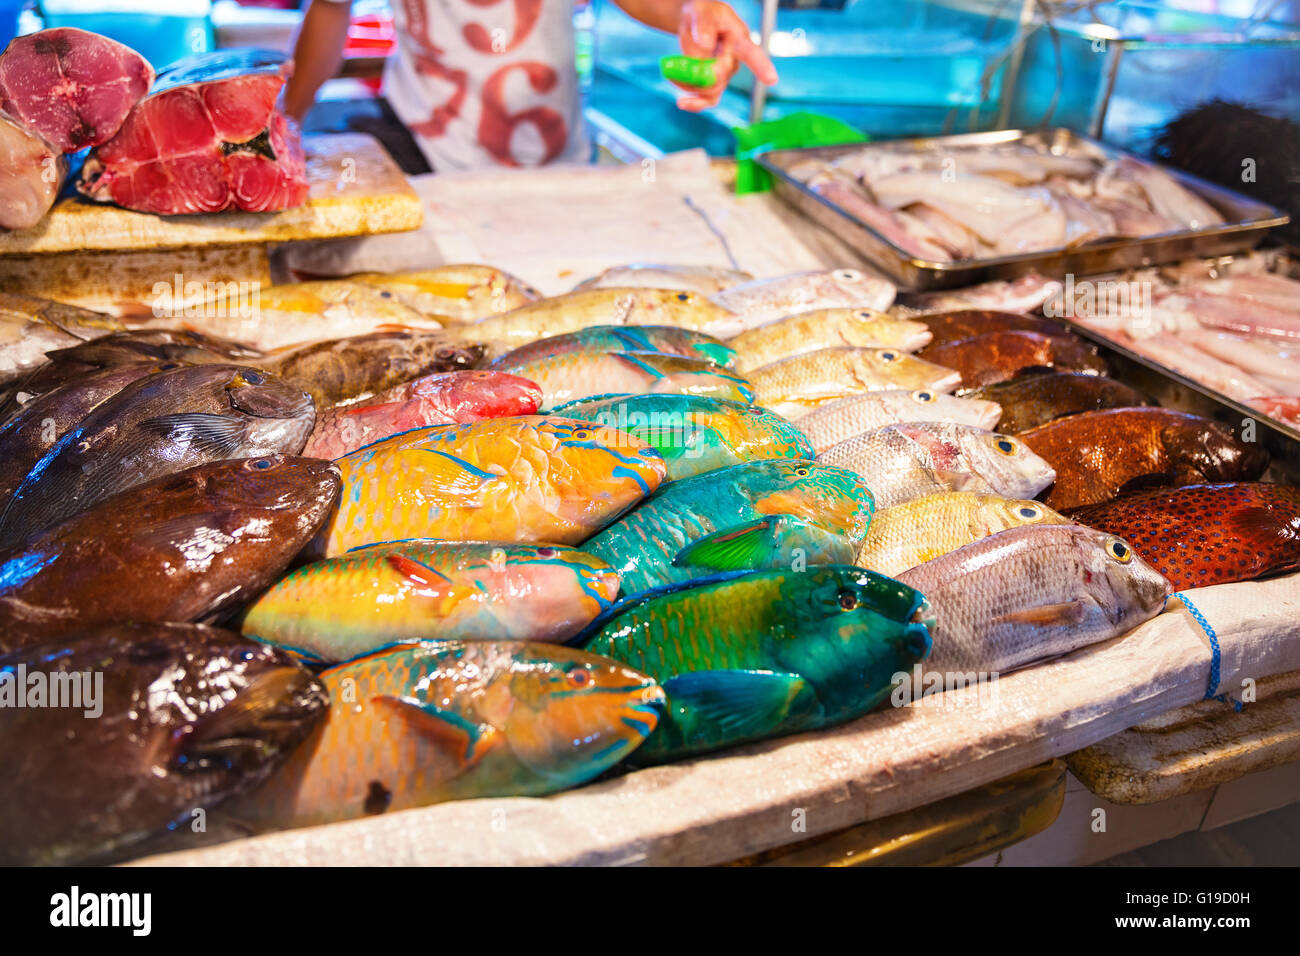 Different kinds of fish for sale at fish market Stock Photo